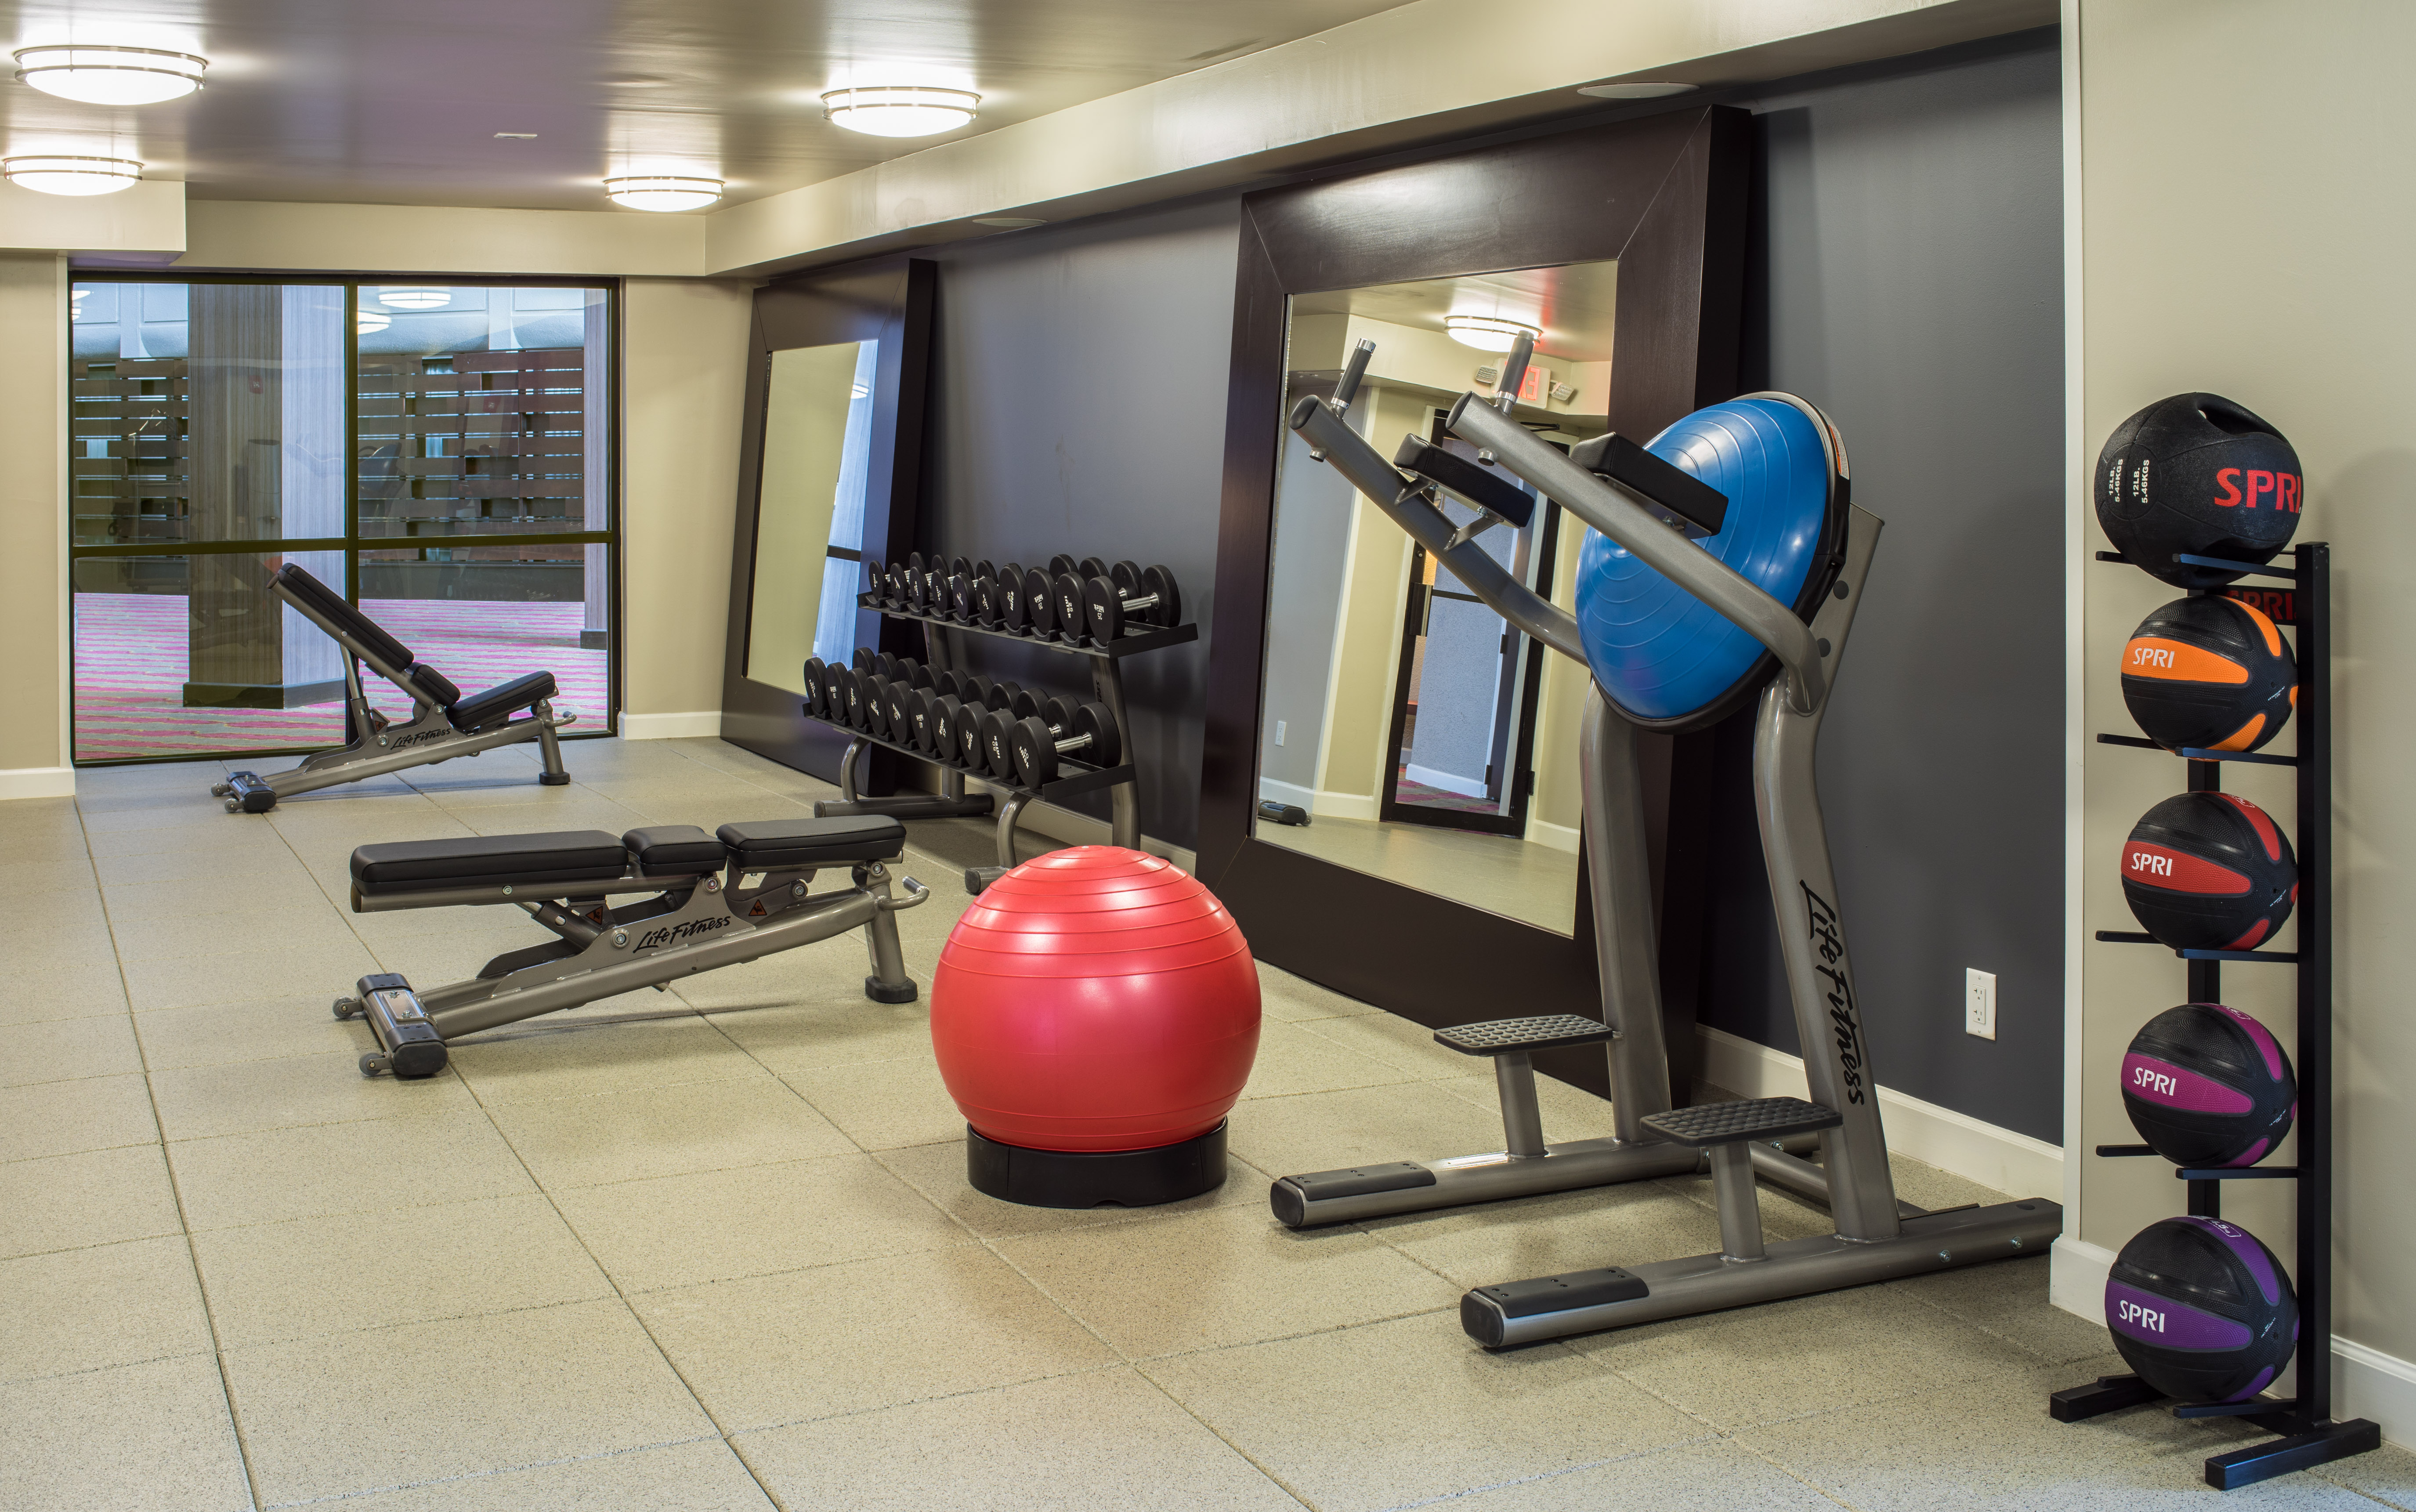 Fitness Center With Weight Benches, Free Weights, Two Large Mirrors, Red Exercise Ball, Life Fitness Machine, and Weight Balls